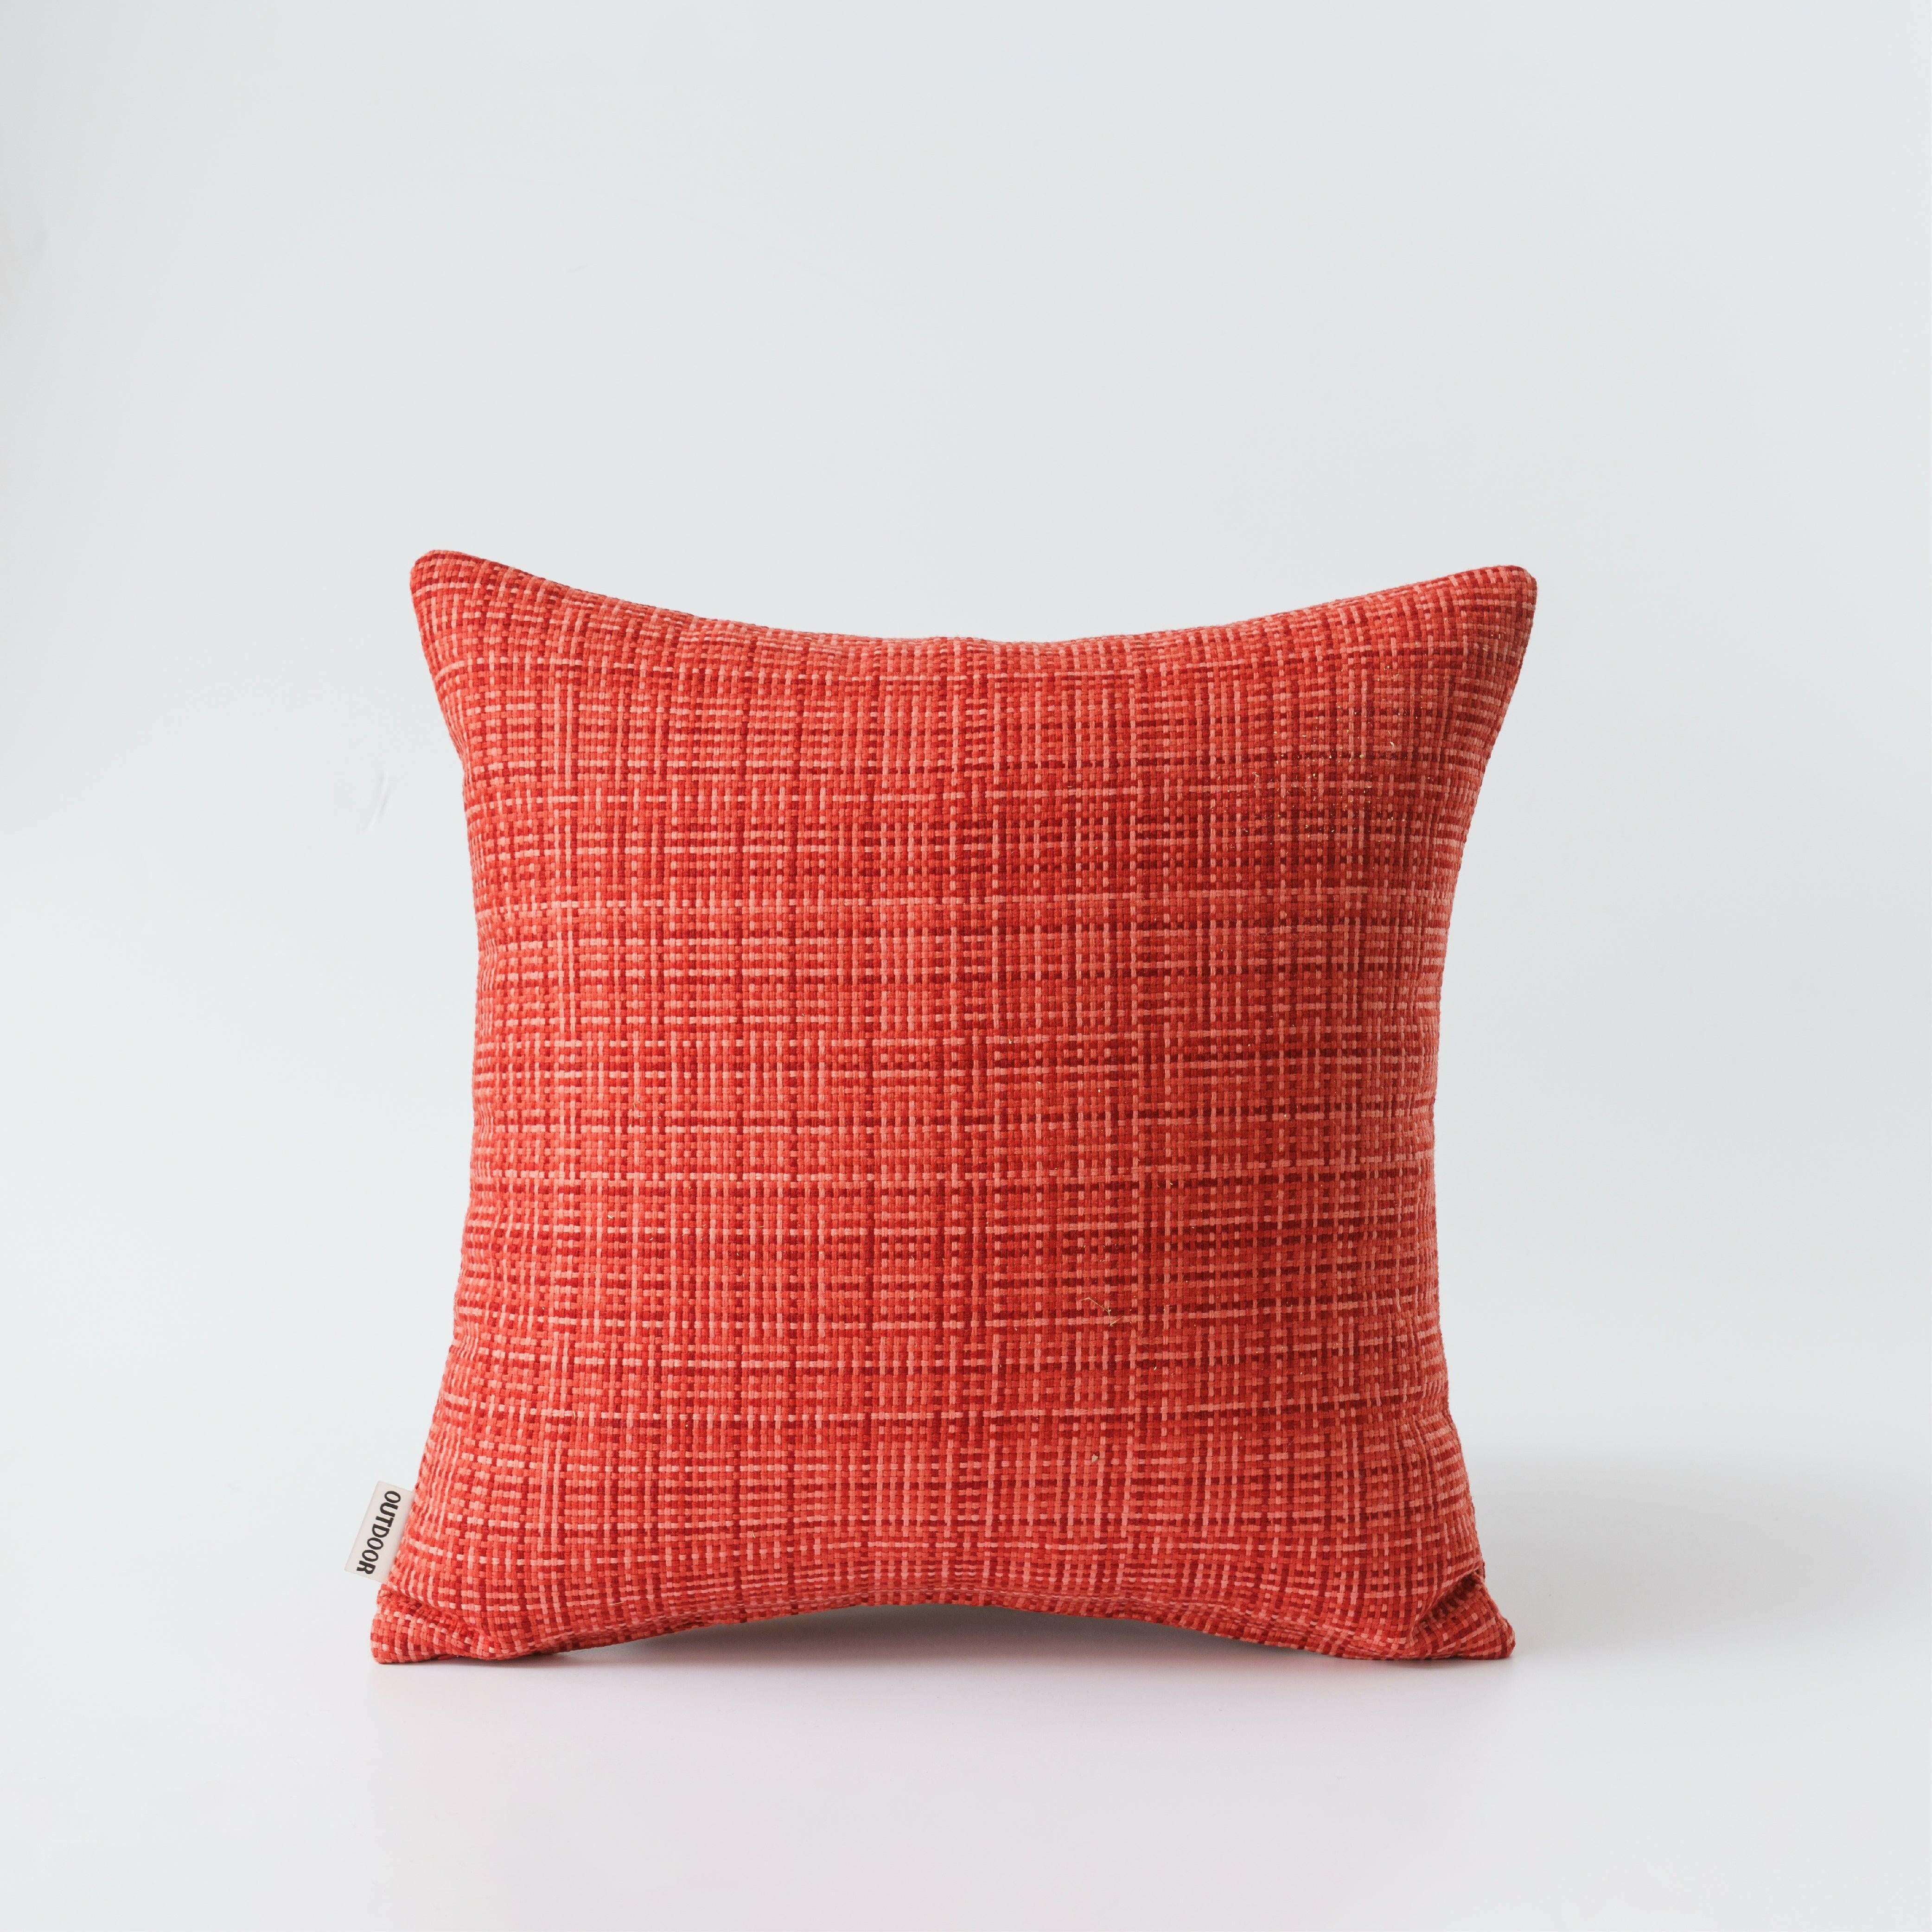 Hyper Cover Weave Outdoor Cushion Covers | Cushion Covers | Brilliant Home Living